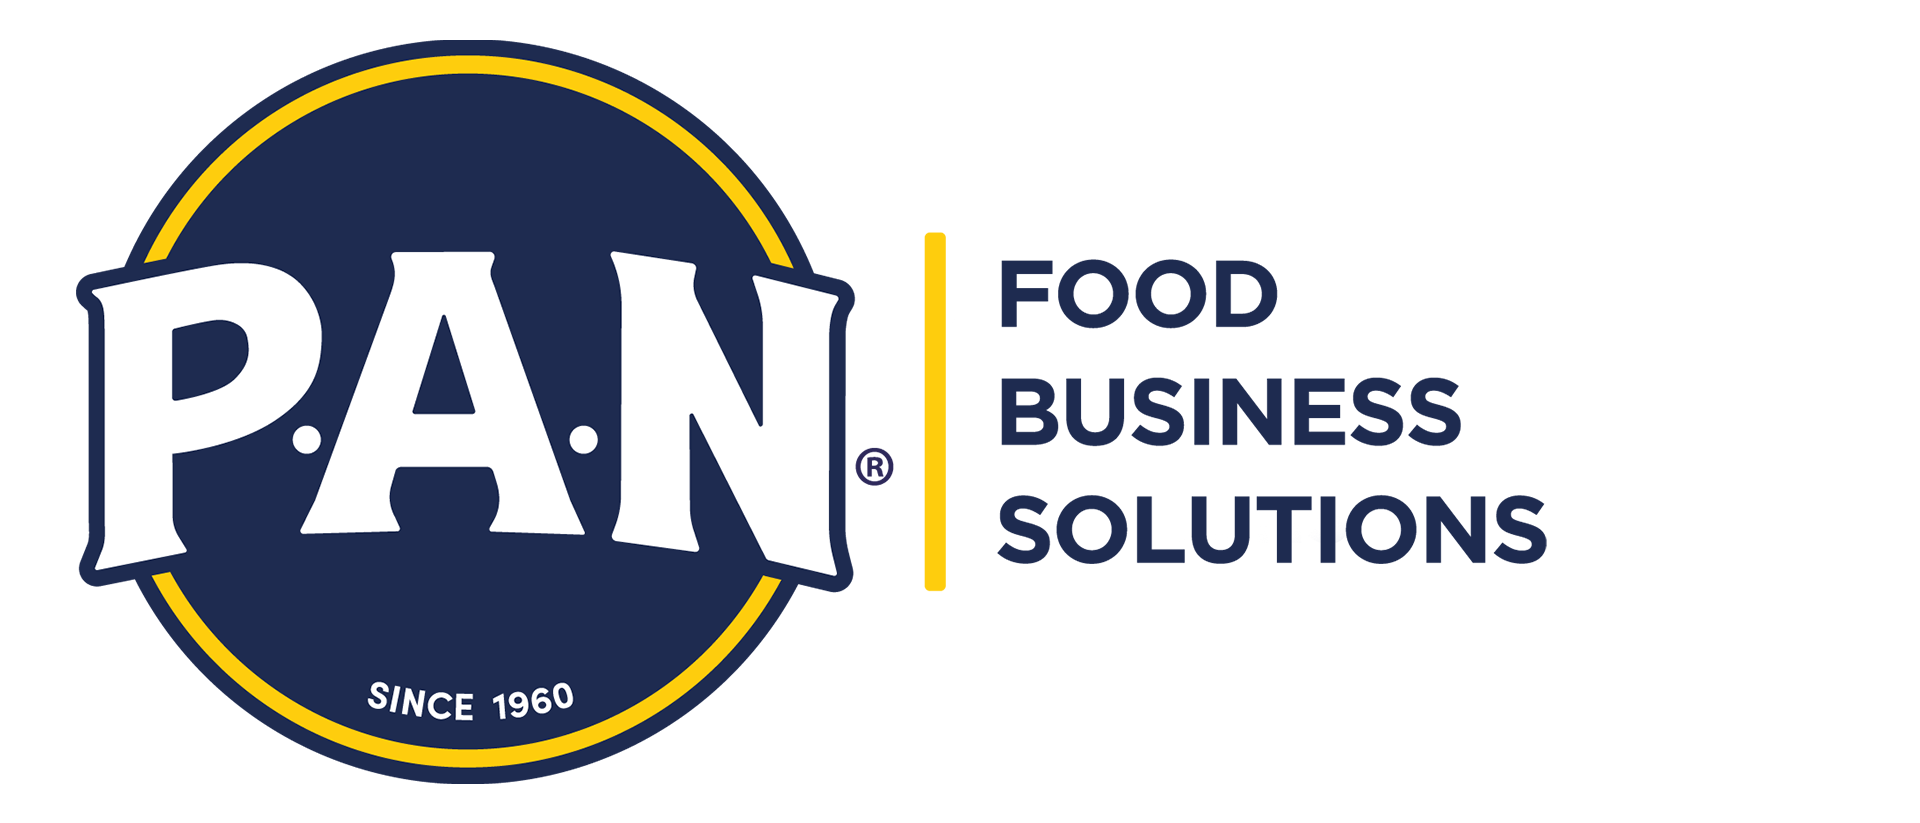 P.A.N. FOOD BUSINESS SOLUTIONS